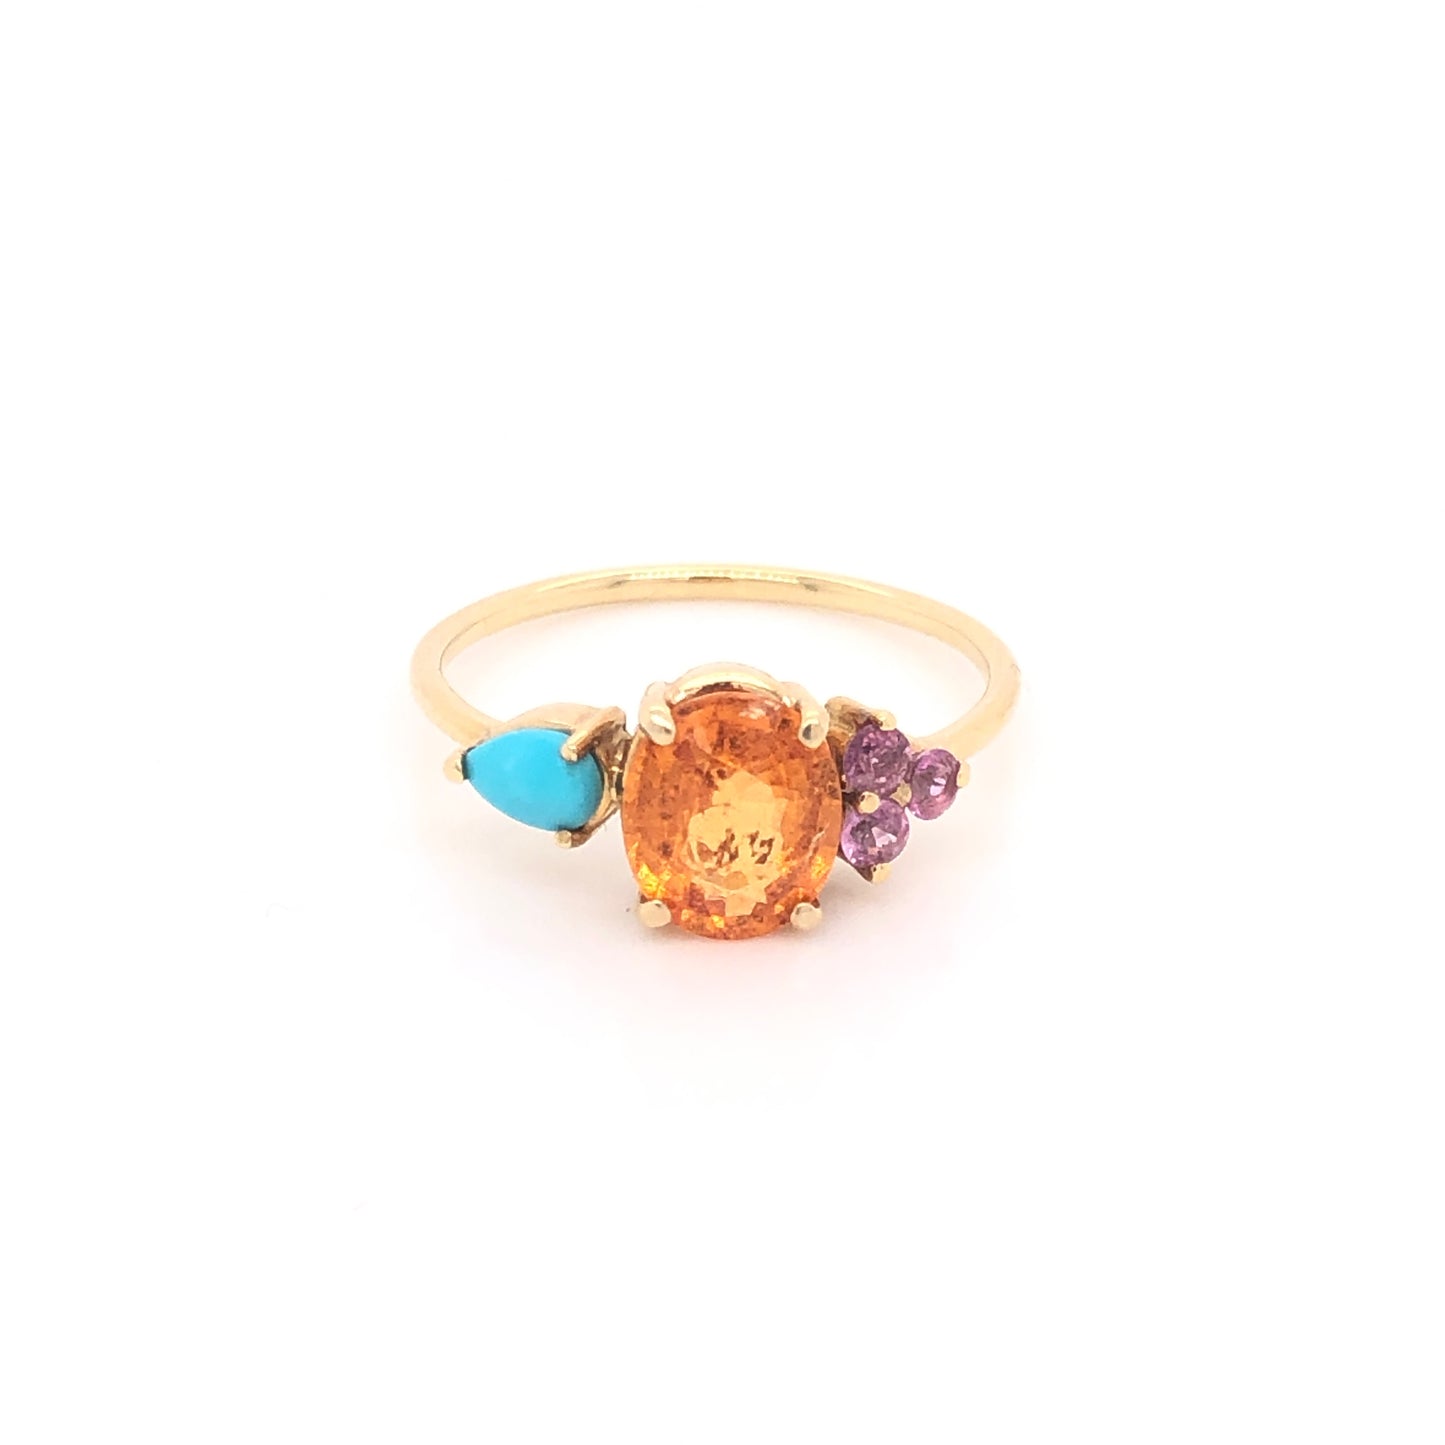 Mandarin Garnet Ring with Tourmalines and Turquoise